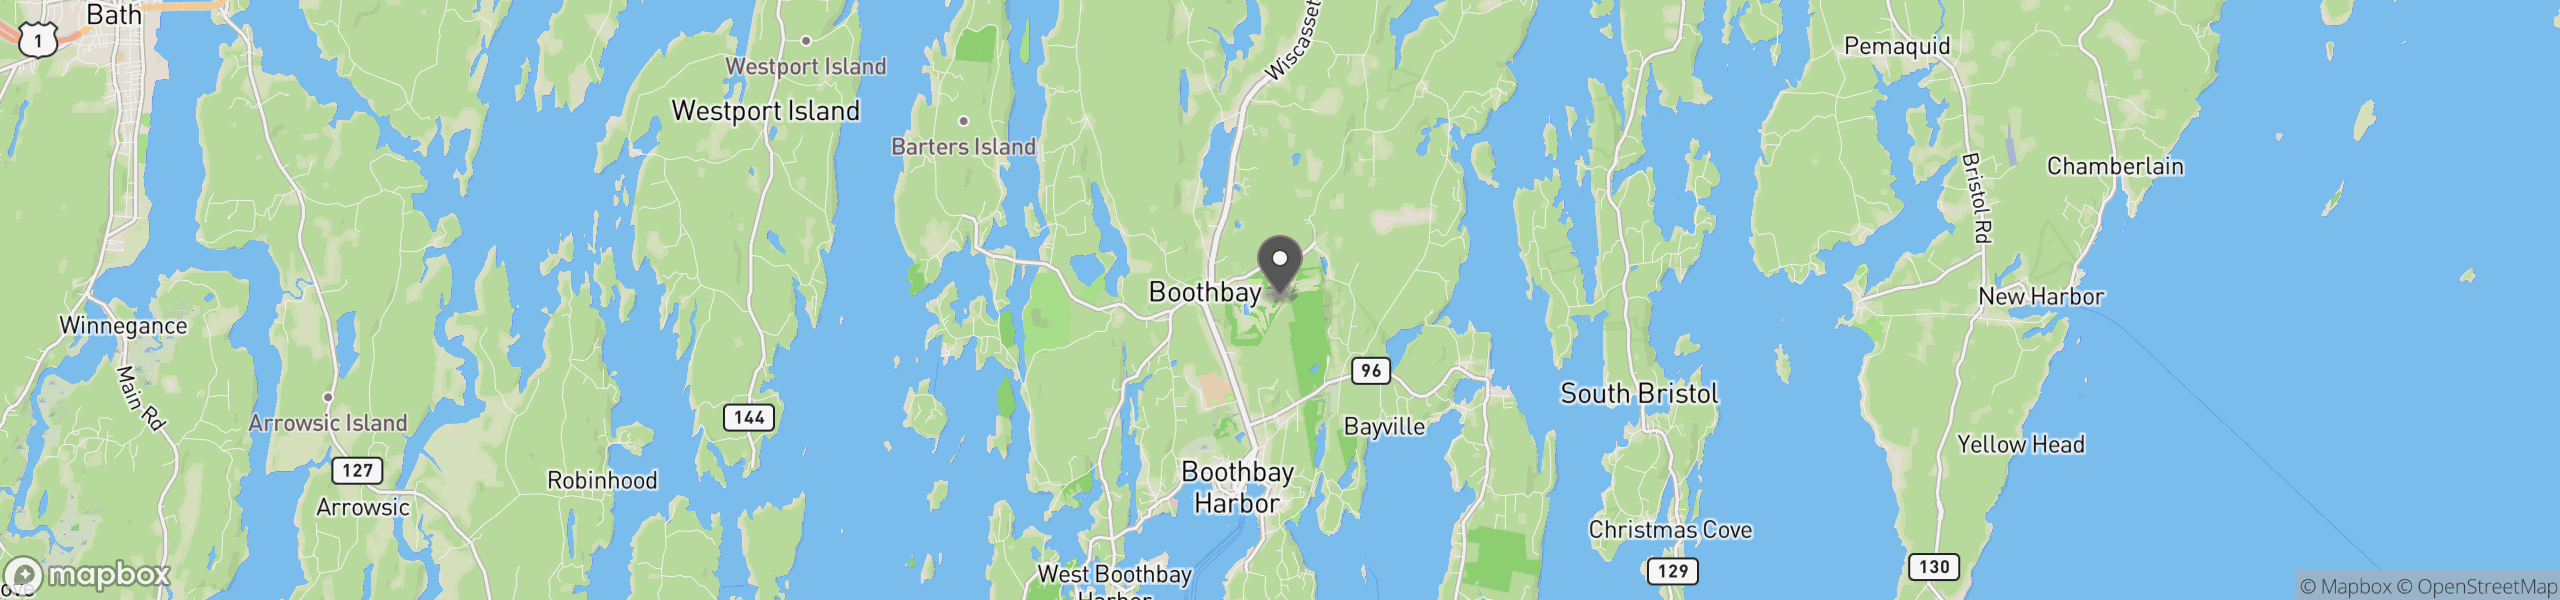 Boothbay, ME